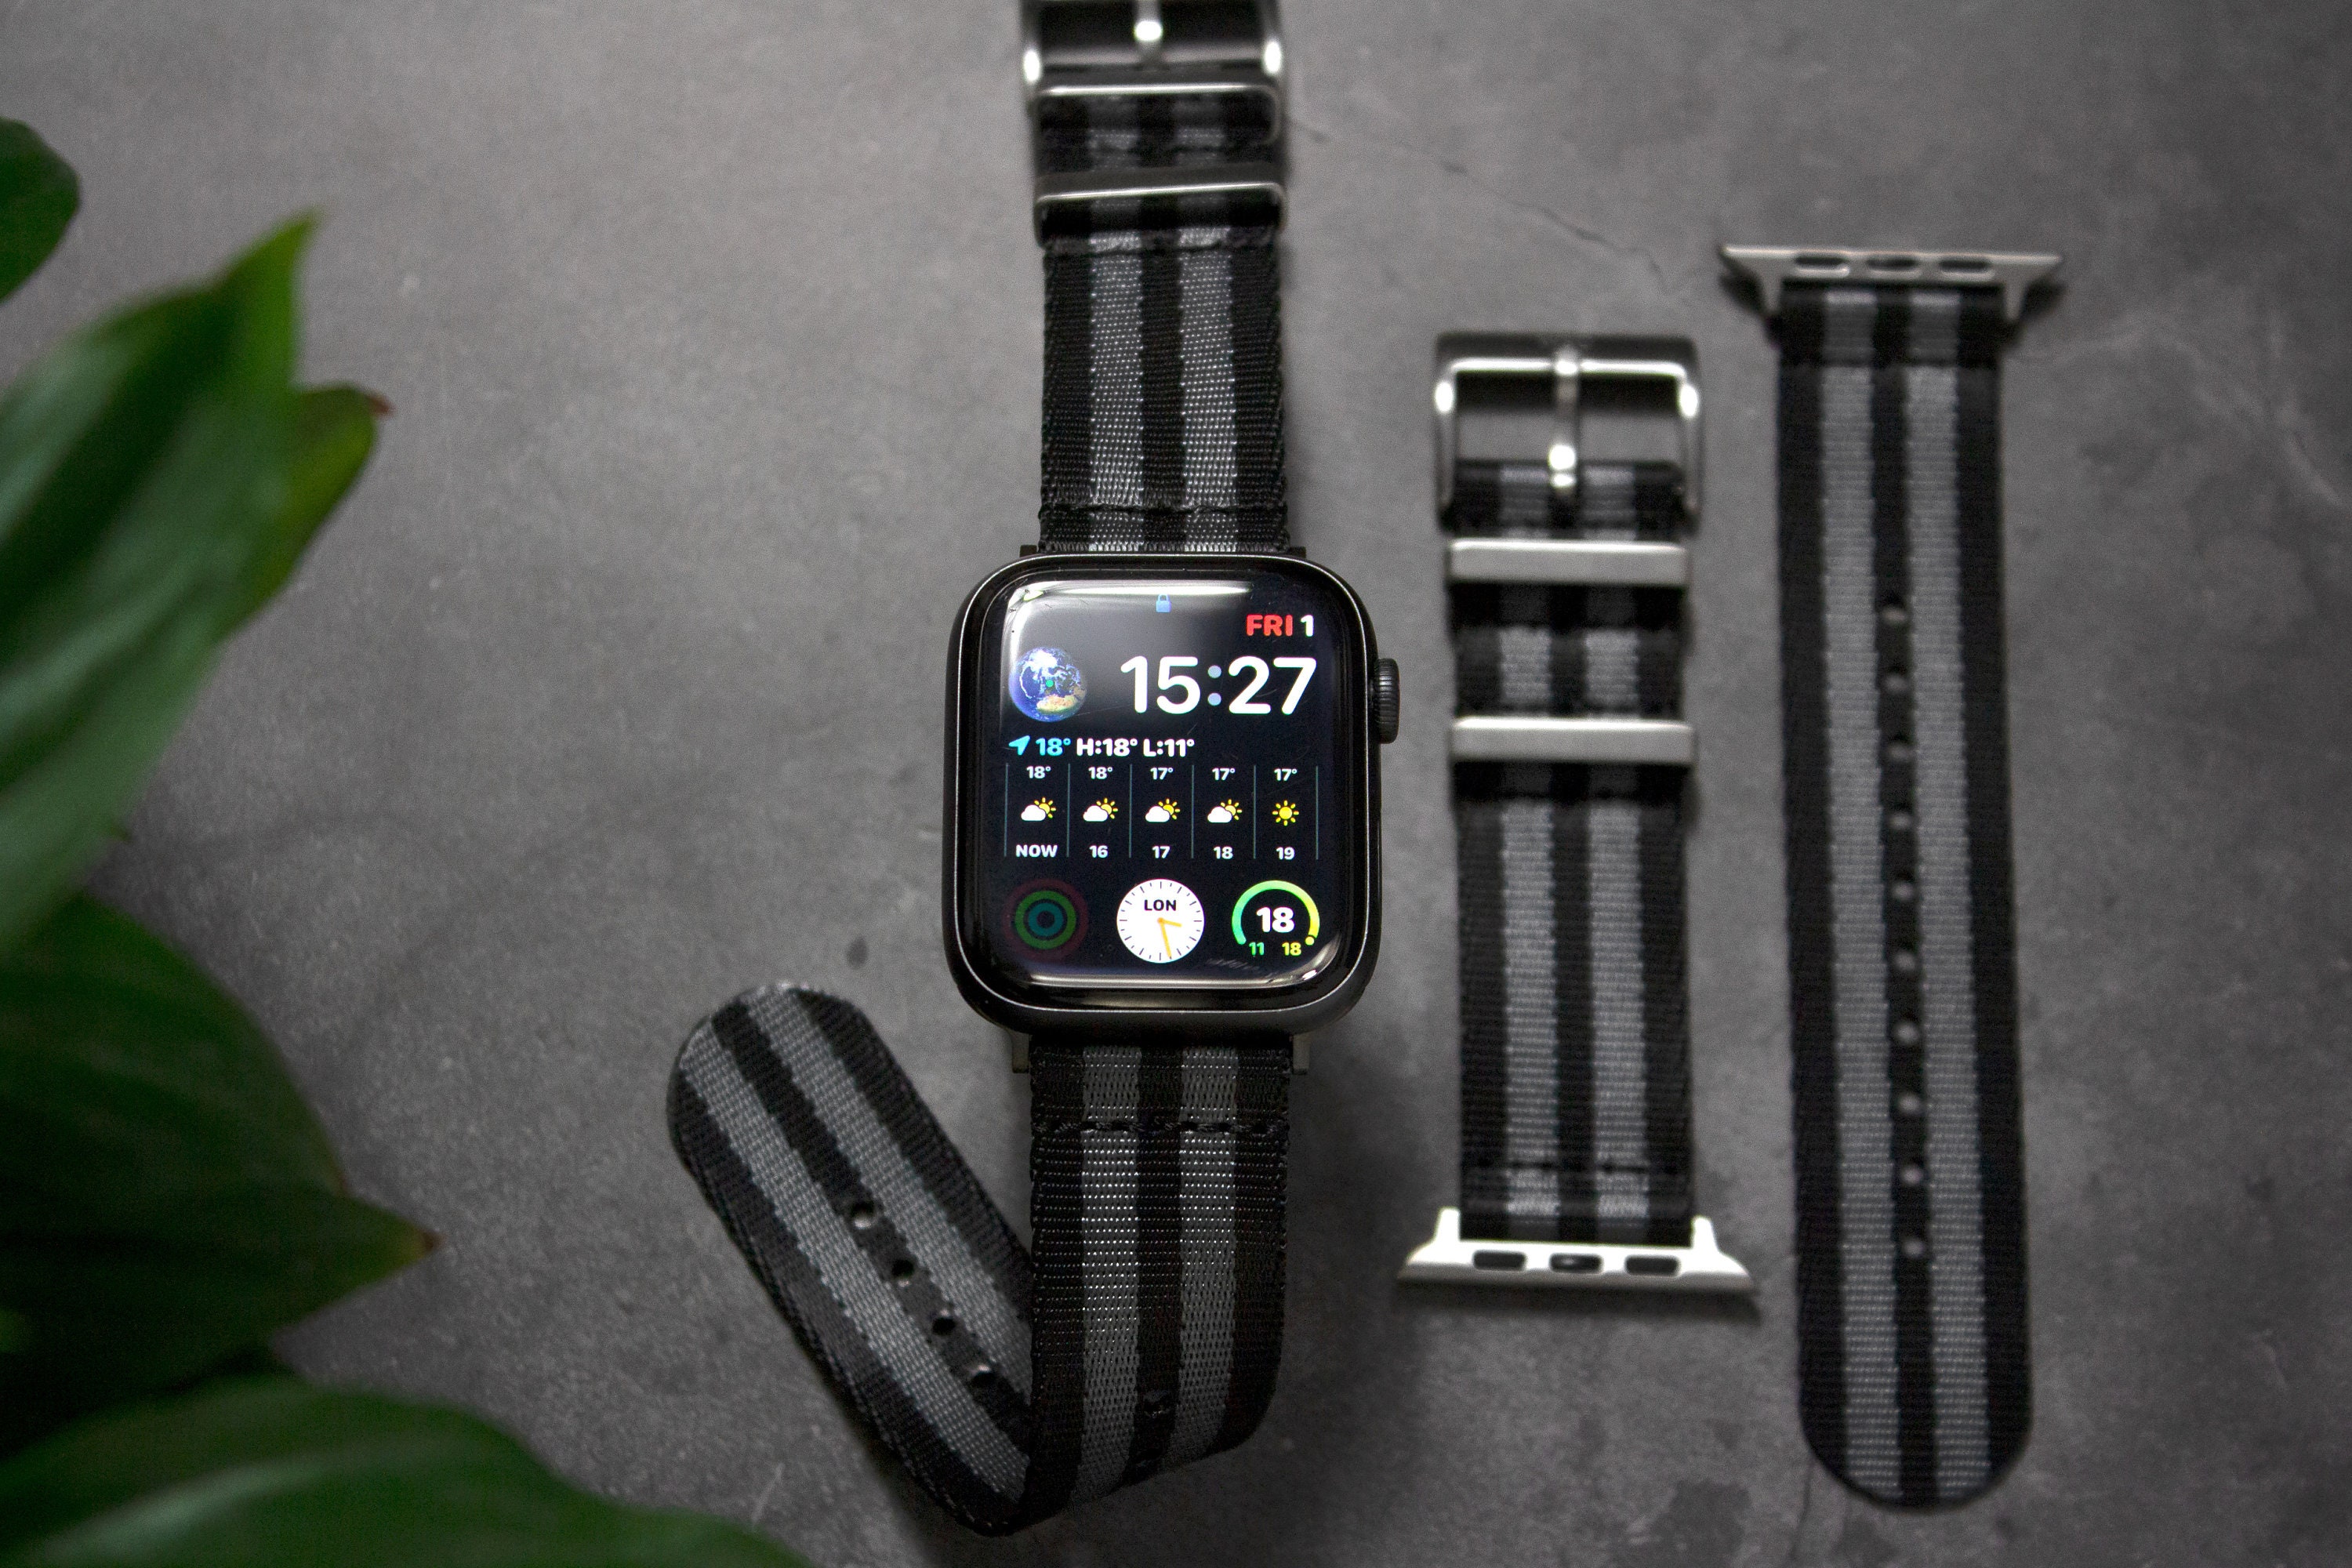 WsC®, Apple Watch Straps & Bands